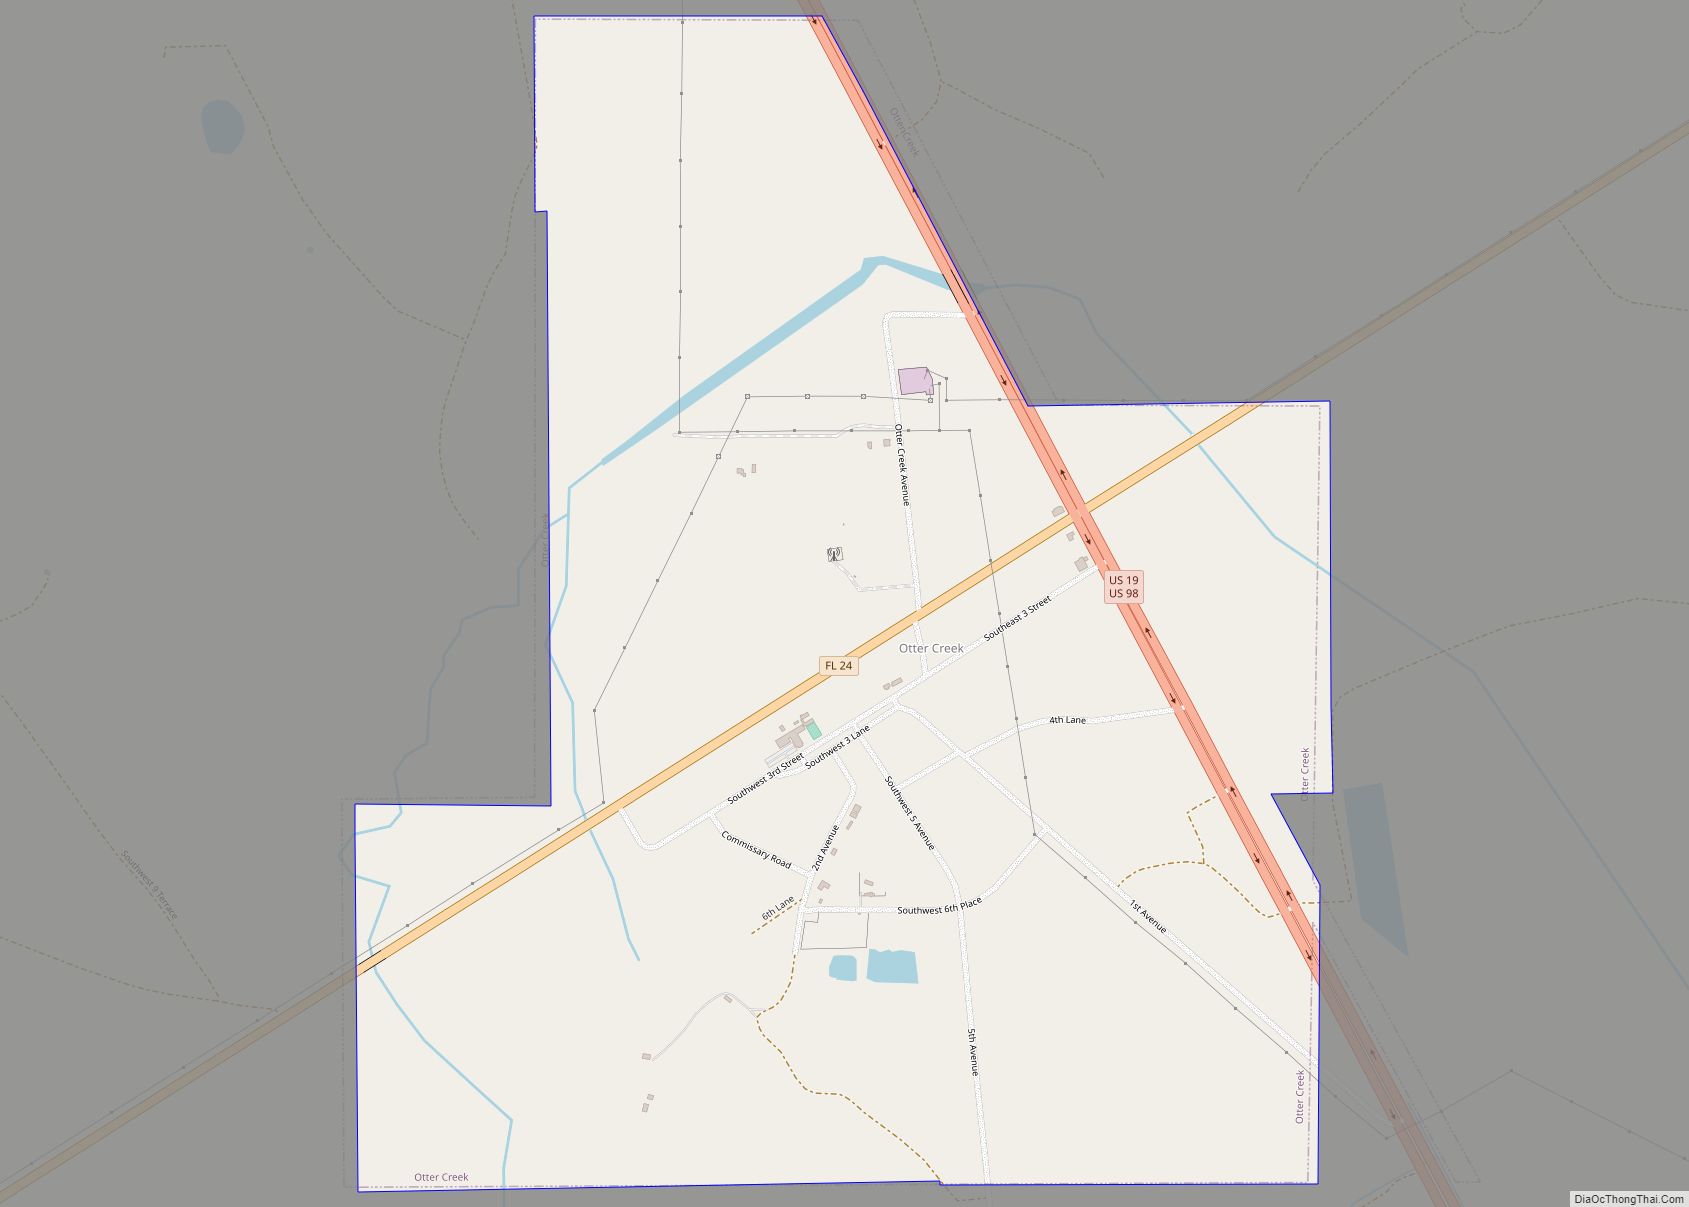 Map of Otter Creek town